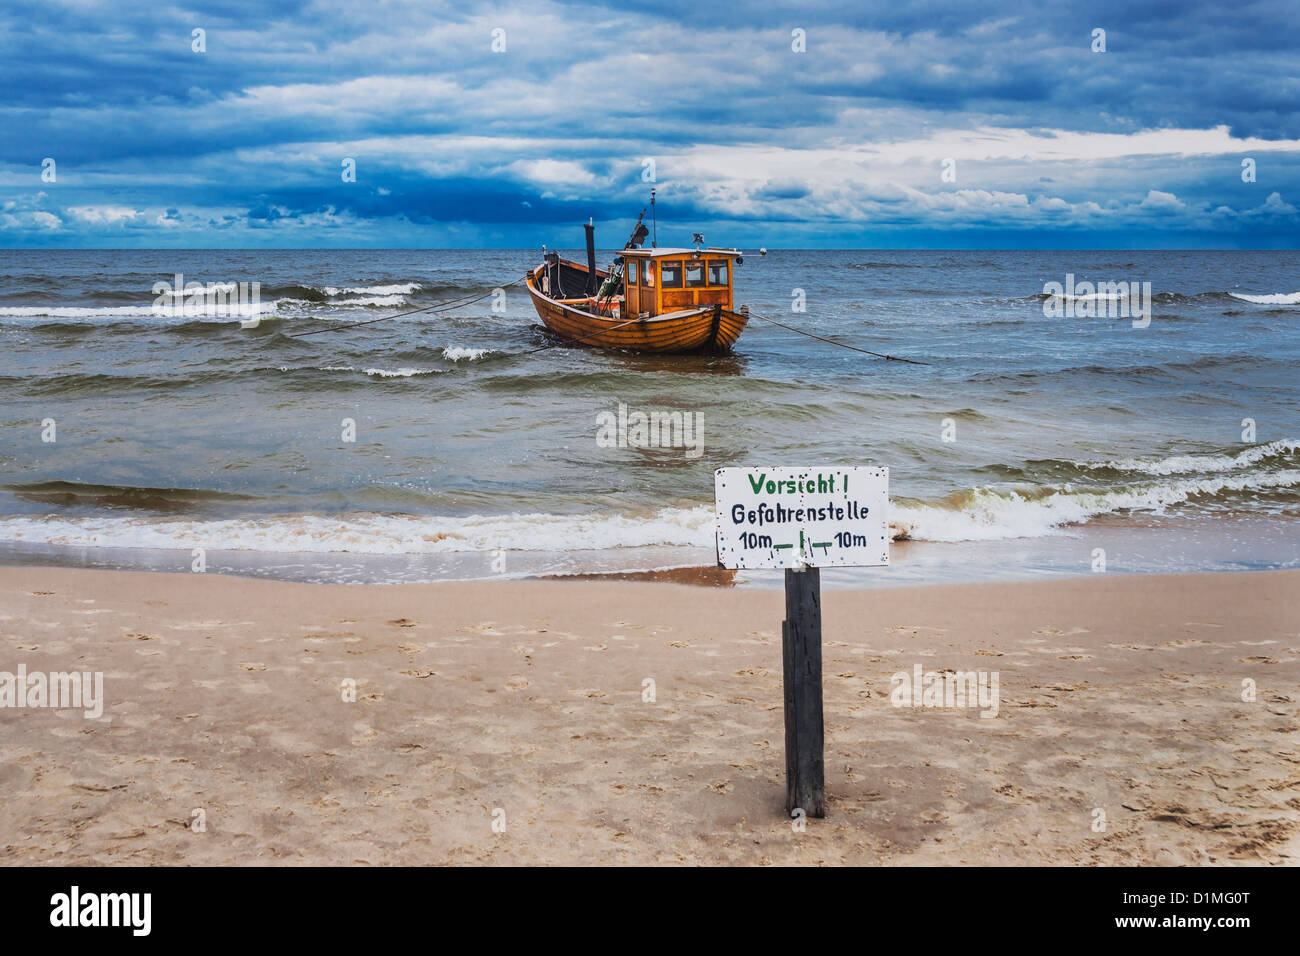 One Fishing boat at the beach of the Baltic Sea, Ahlbeck, Usedom Island, Mecklenburg-Western Pomerania, Germany, Europe Stock Photo